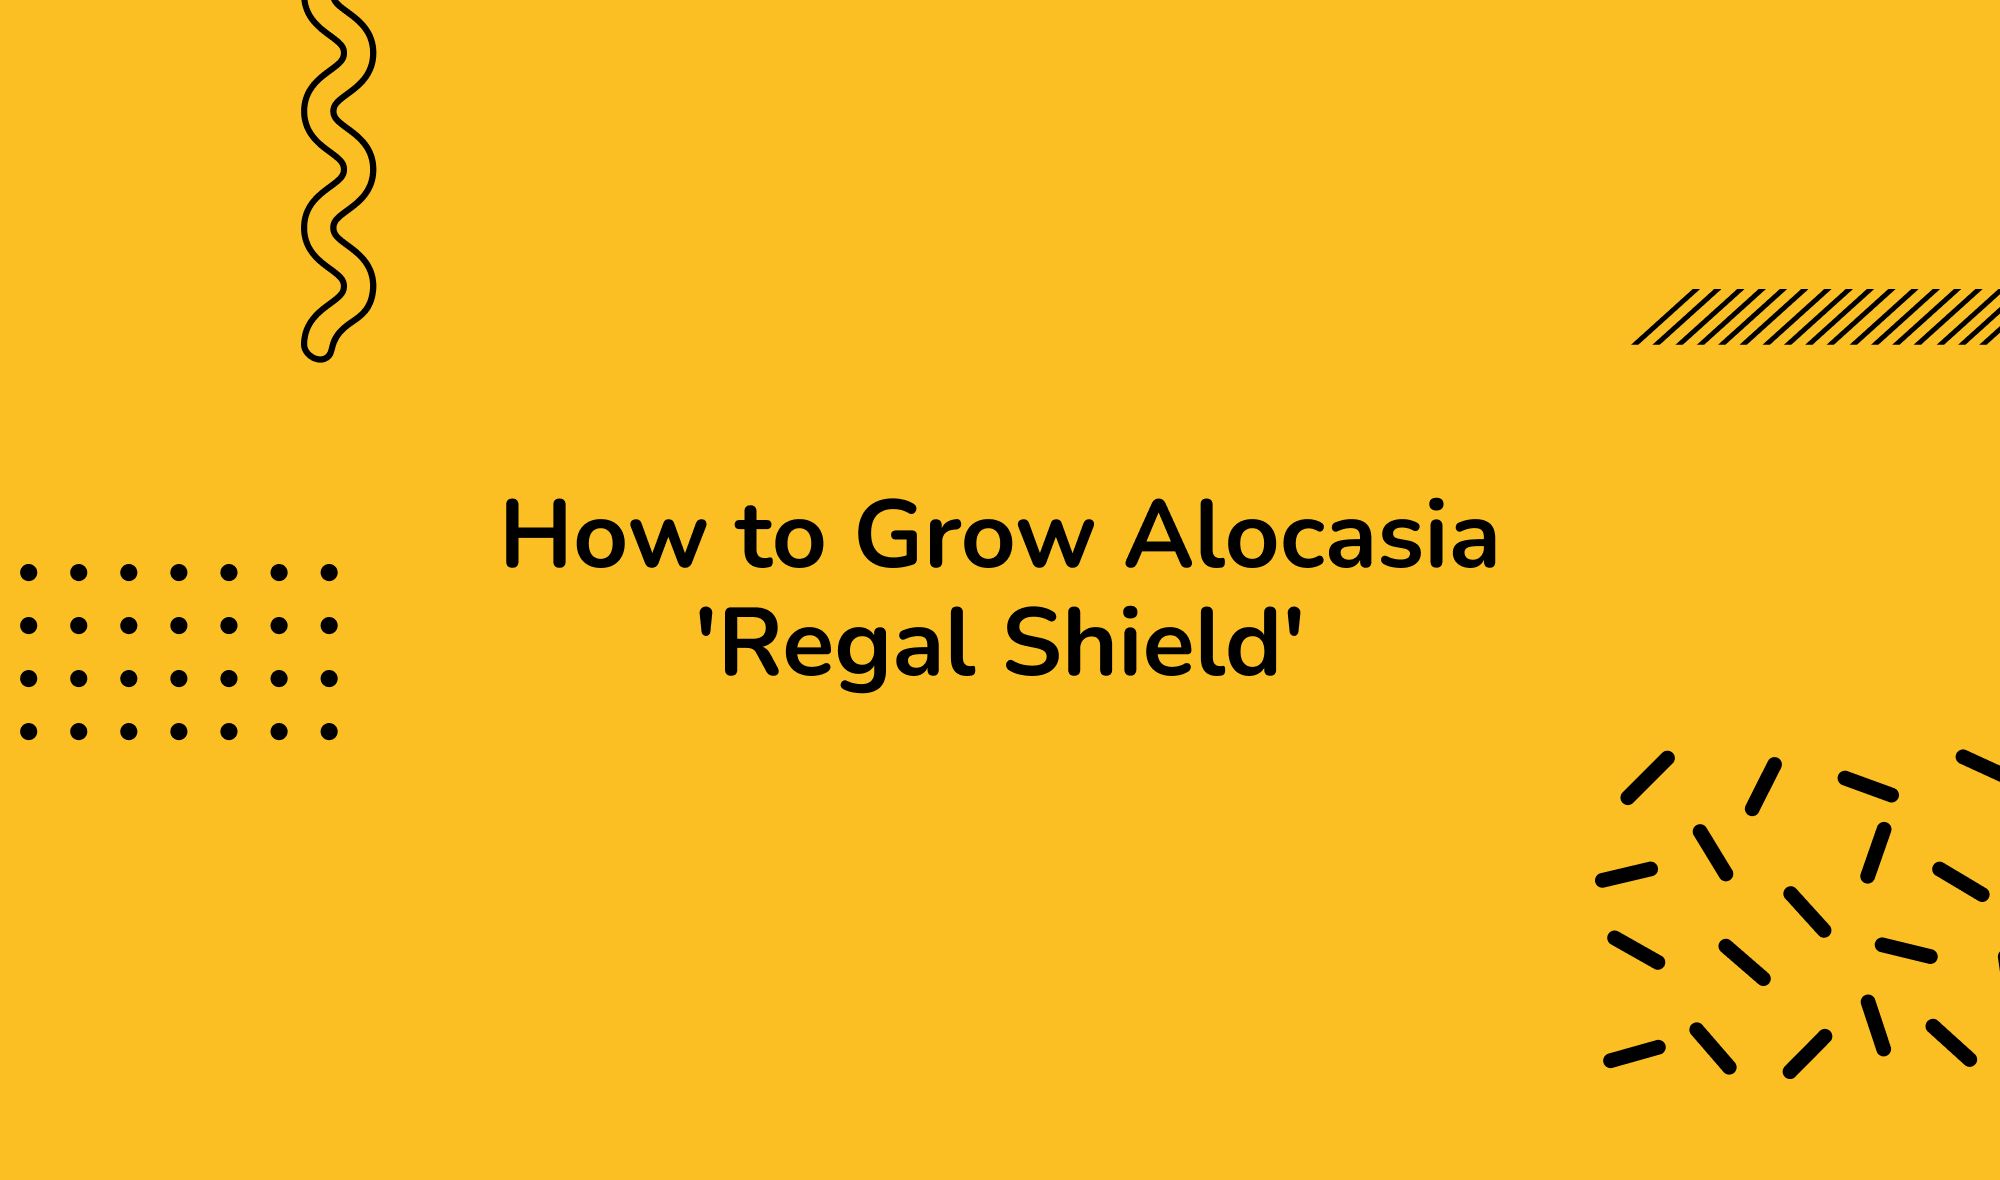 How to Grow Alocasia 'Regal Shield' Both Indoors and Outdoors